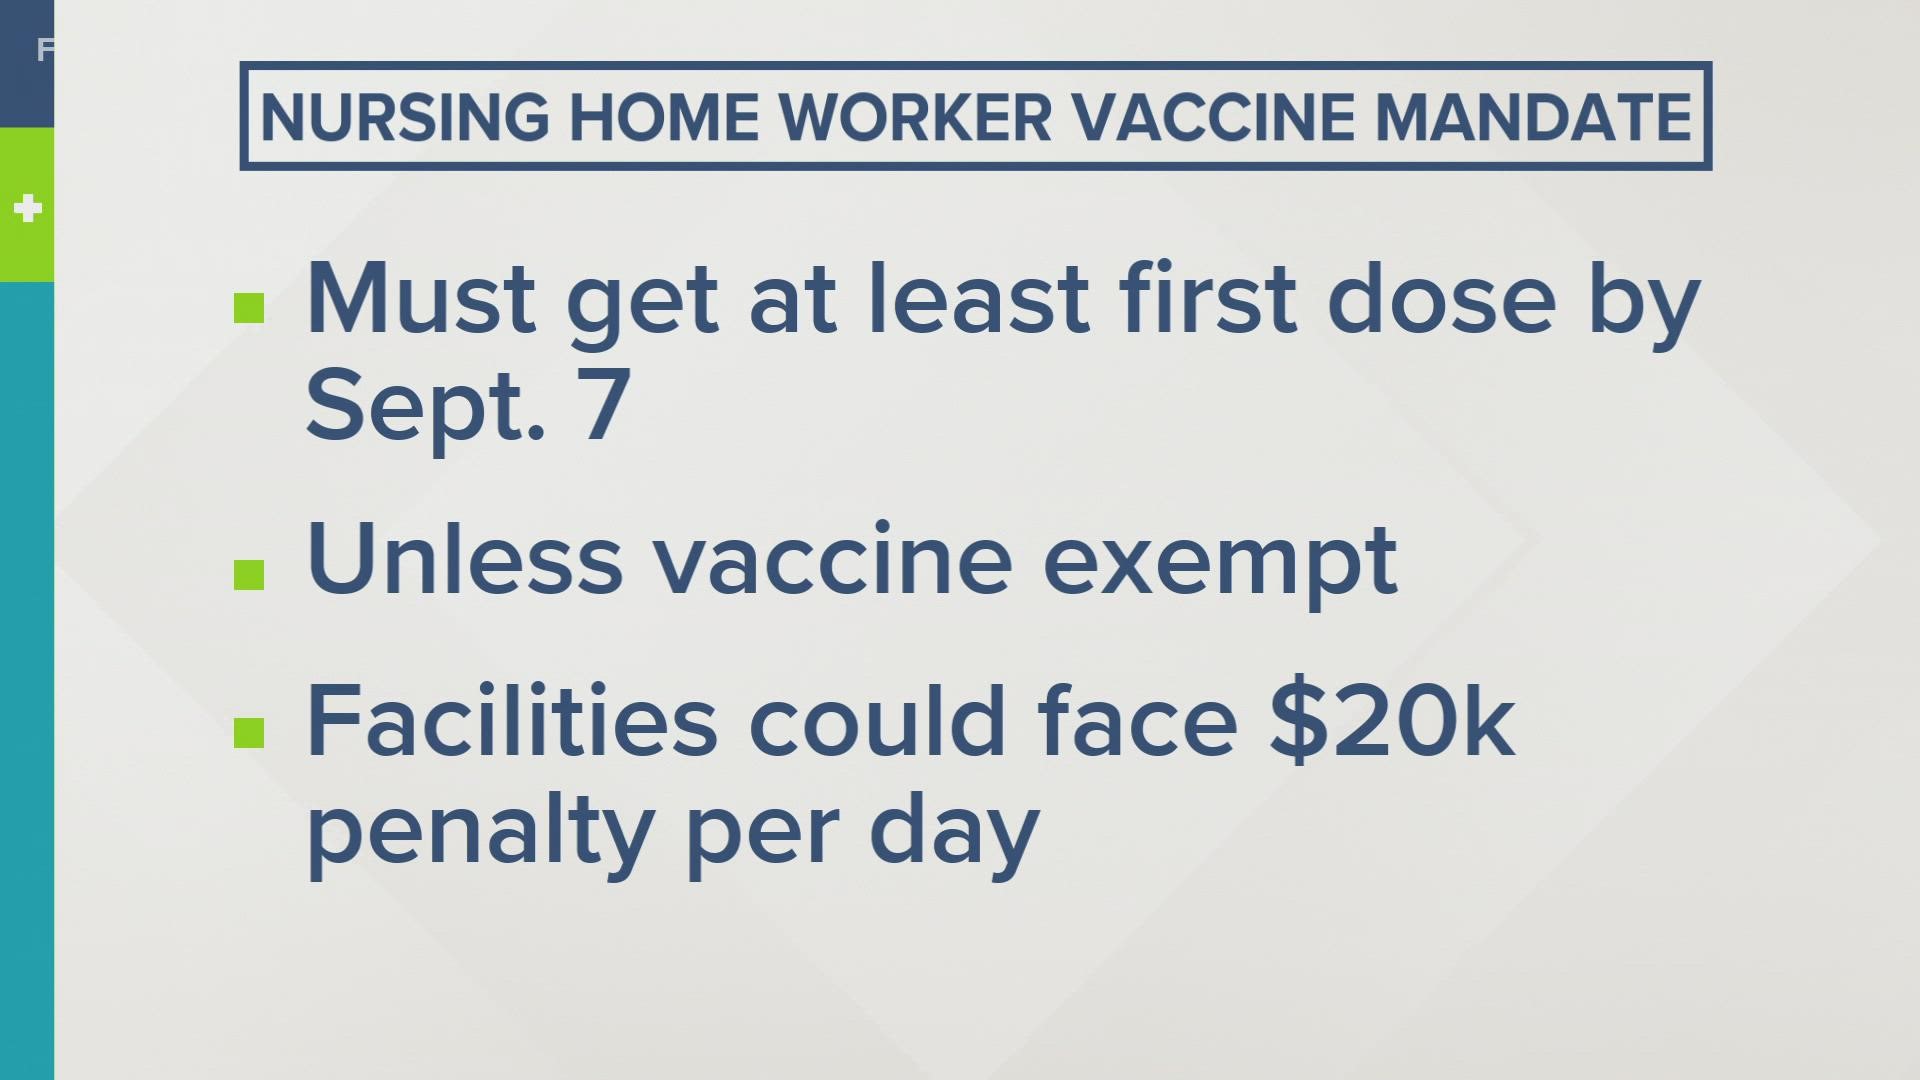 Staff at the facilities have to get at least their first dose of the vaccine by September 7.